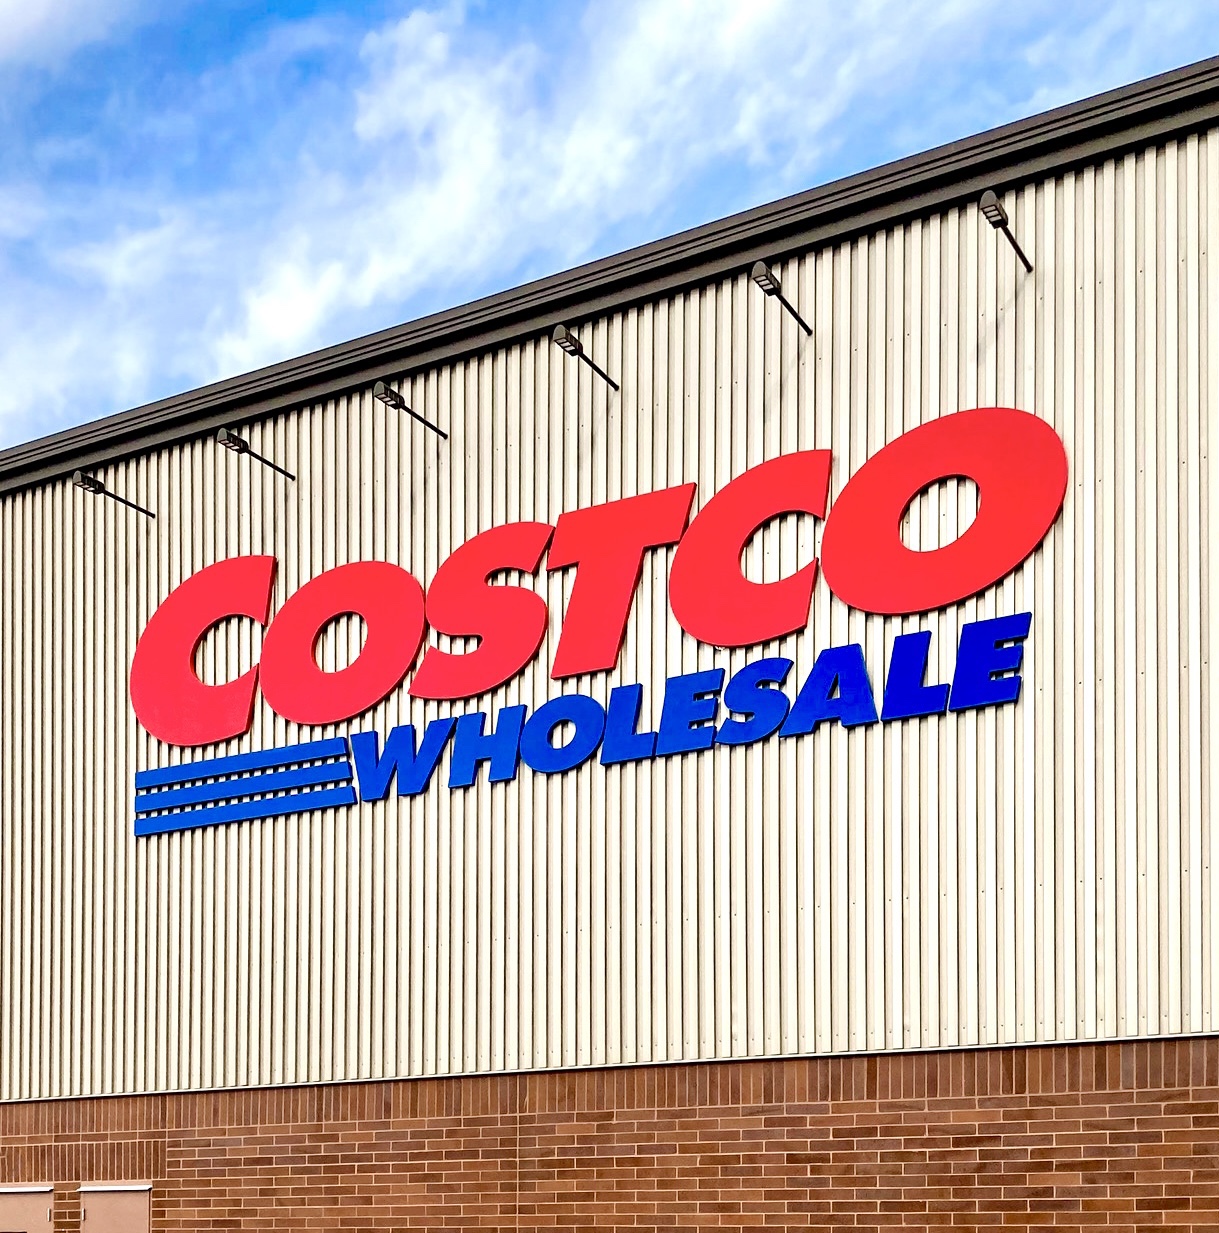 Costco lettering on building outside the costco warehouse store.